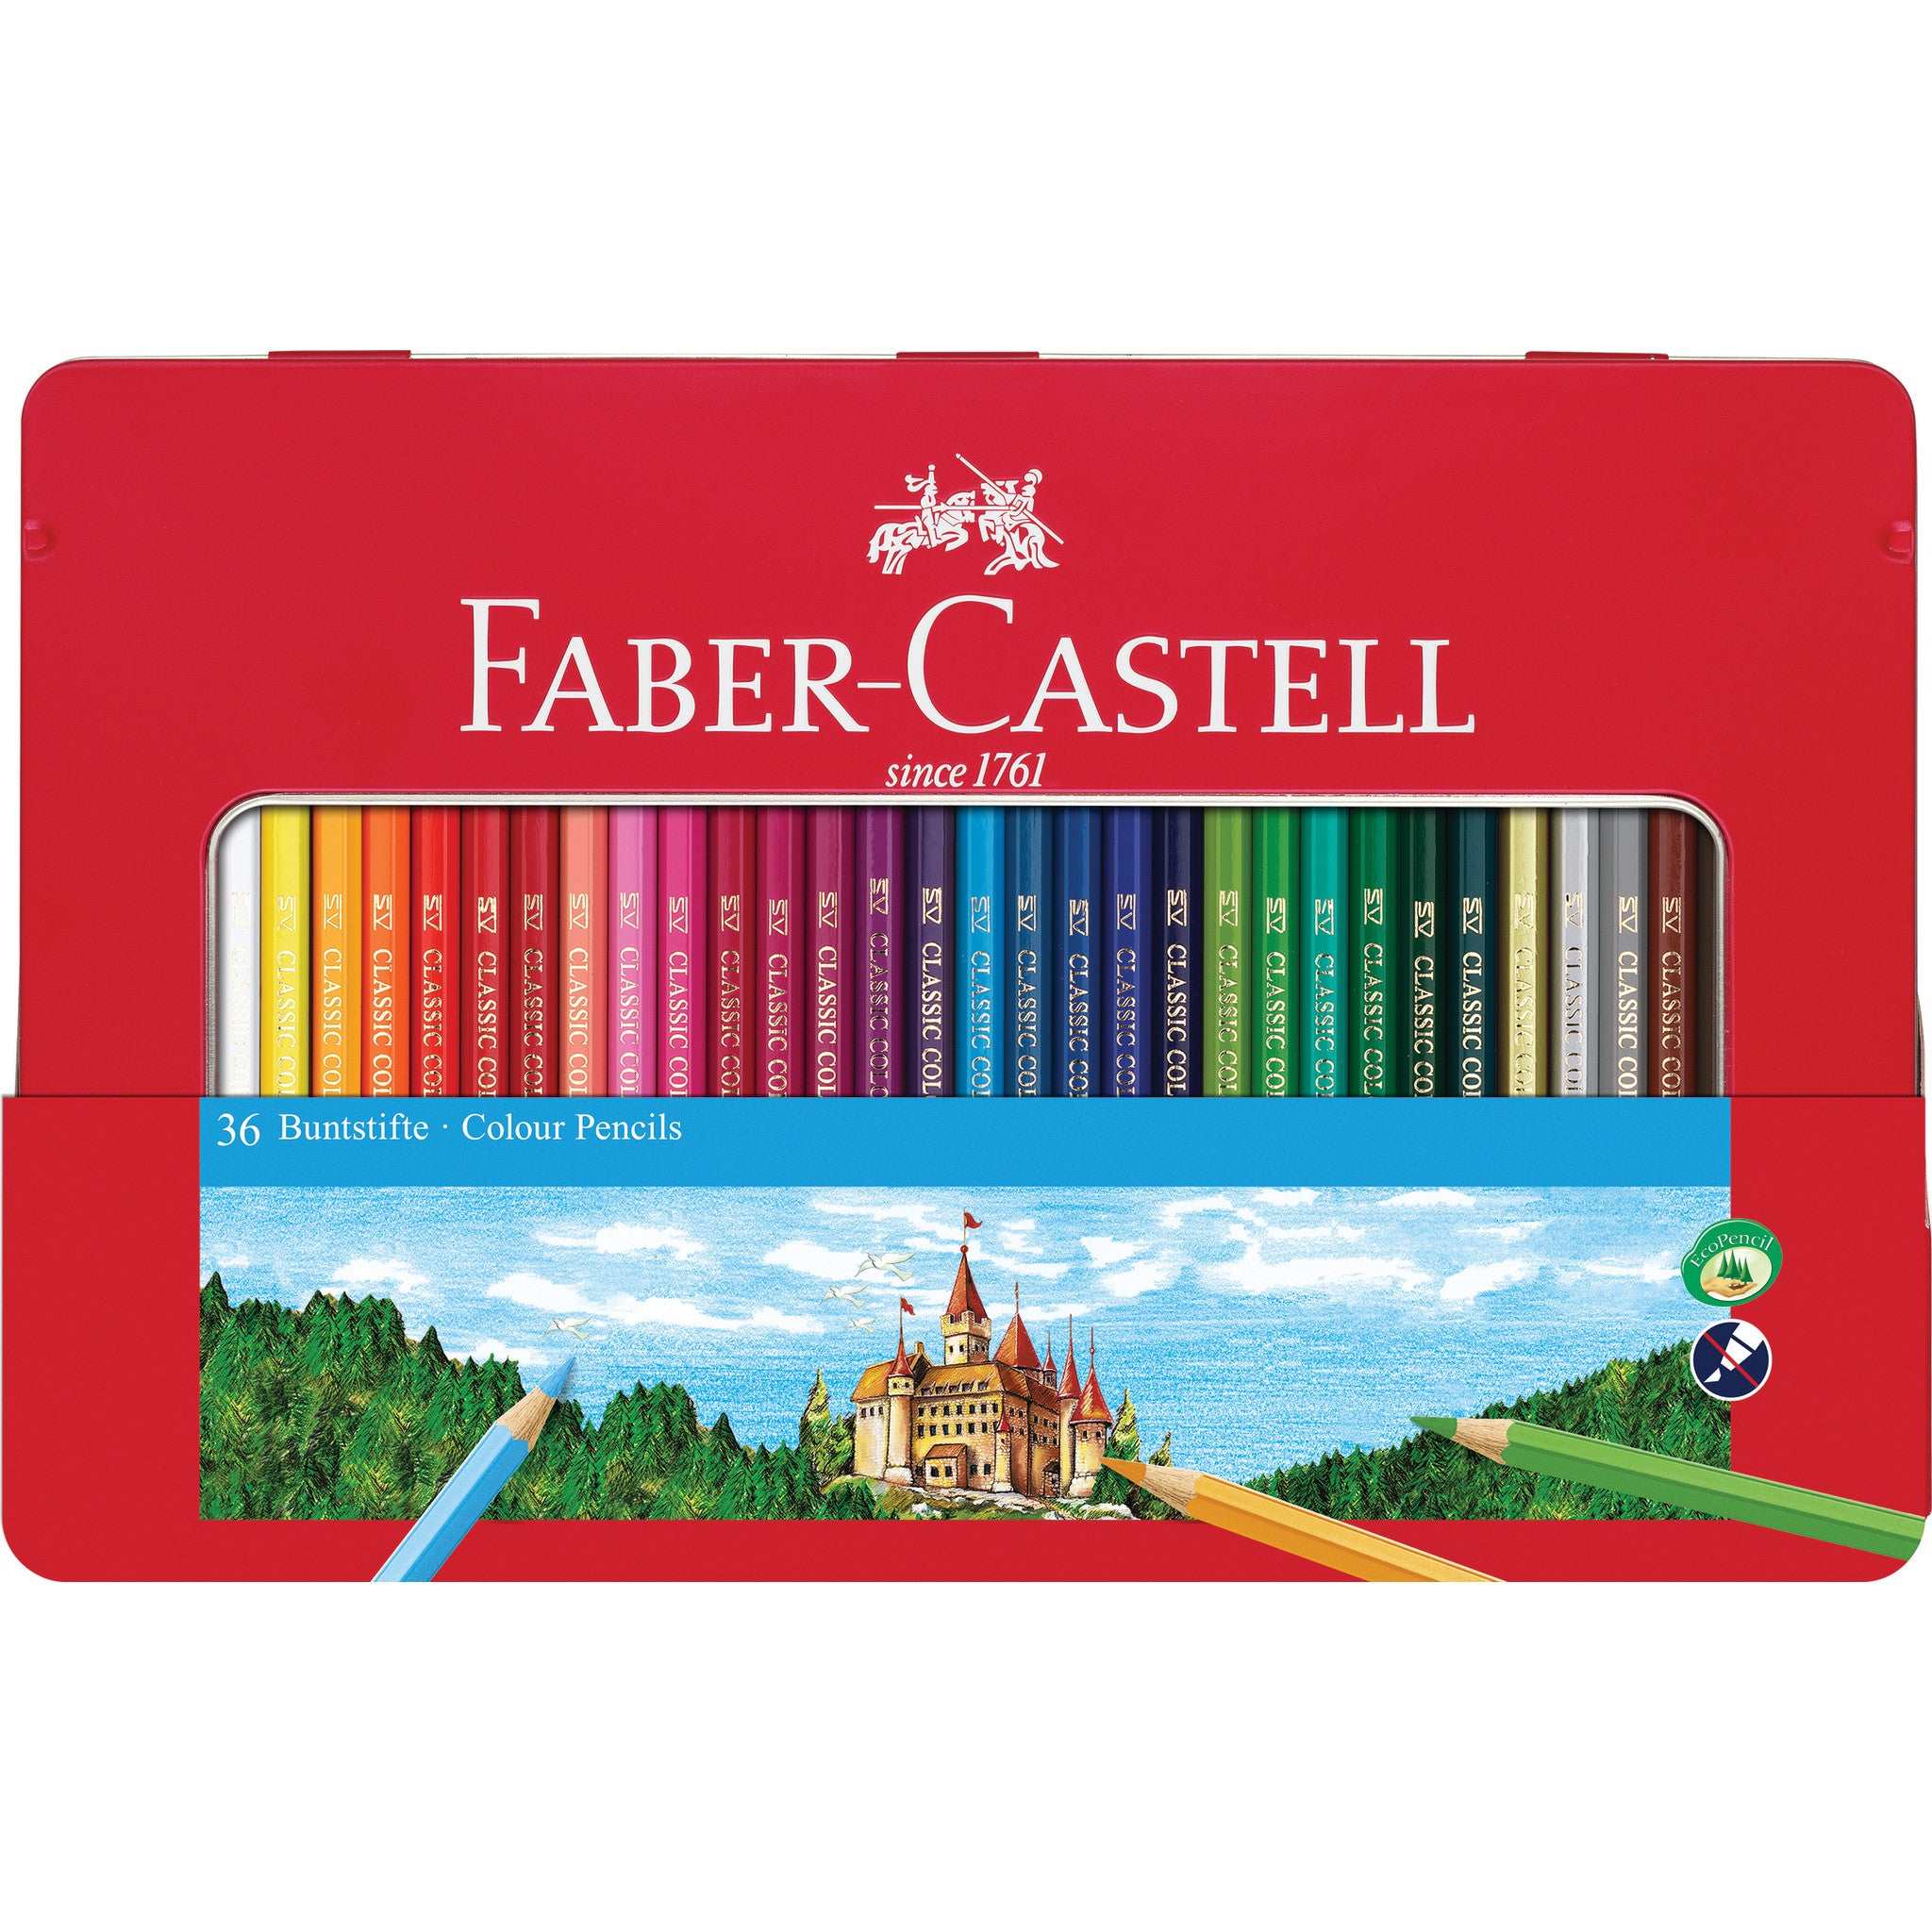 Colouring pencils set of 36 colours, Professional Quality drawing pencils